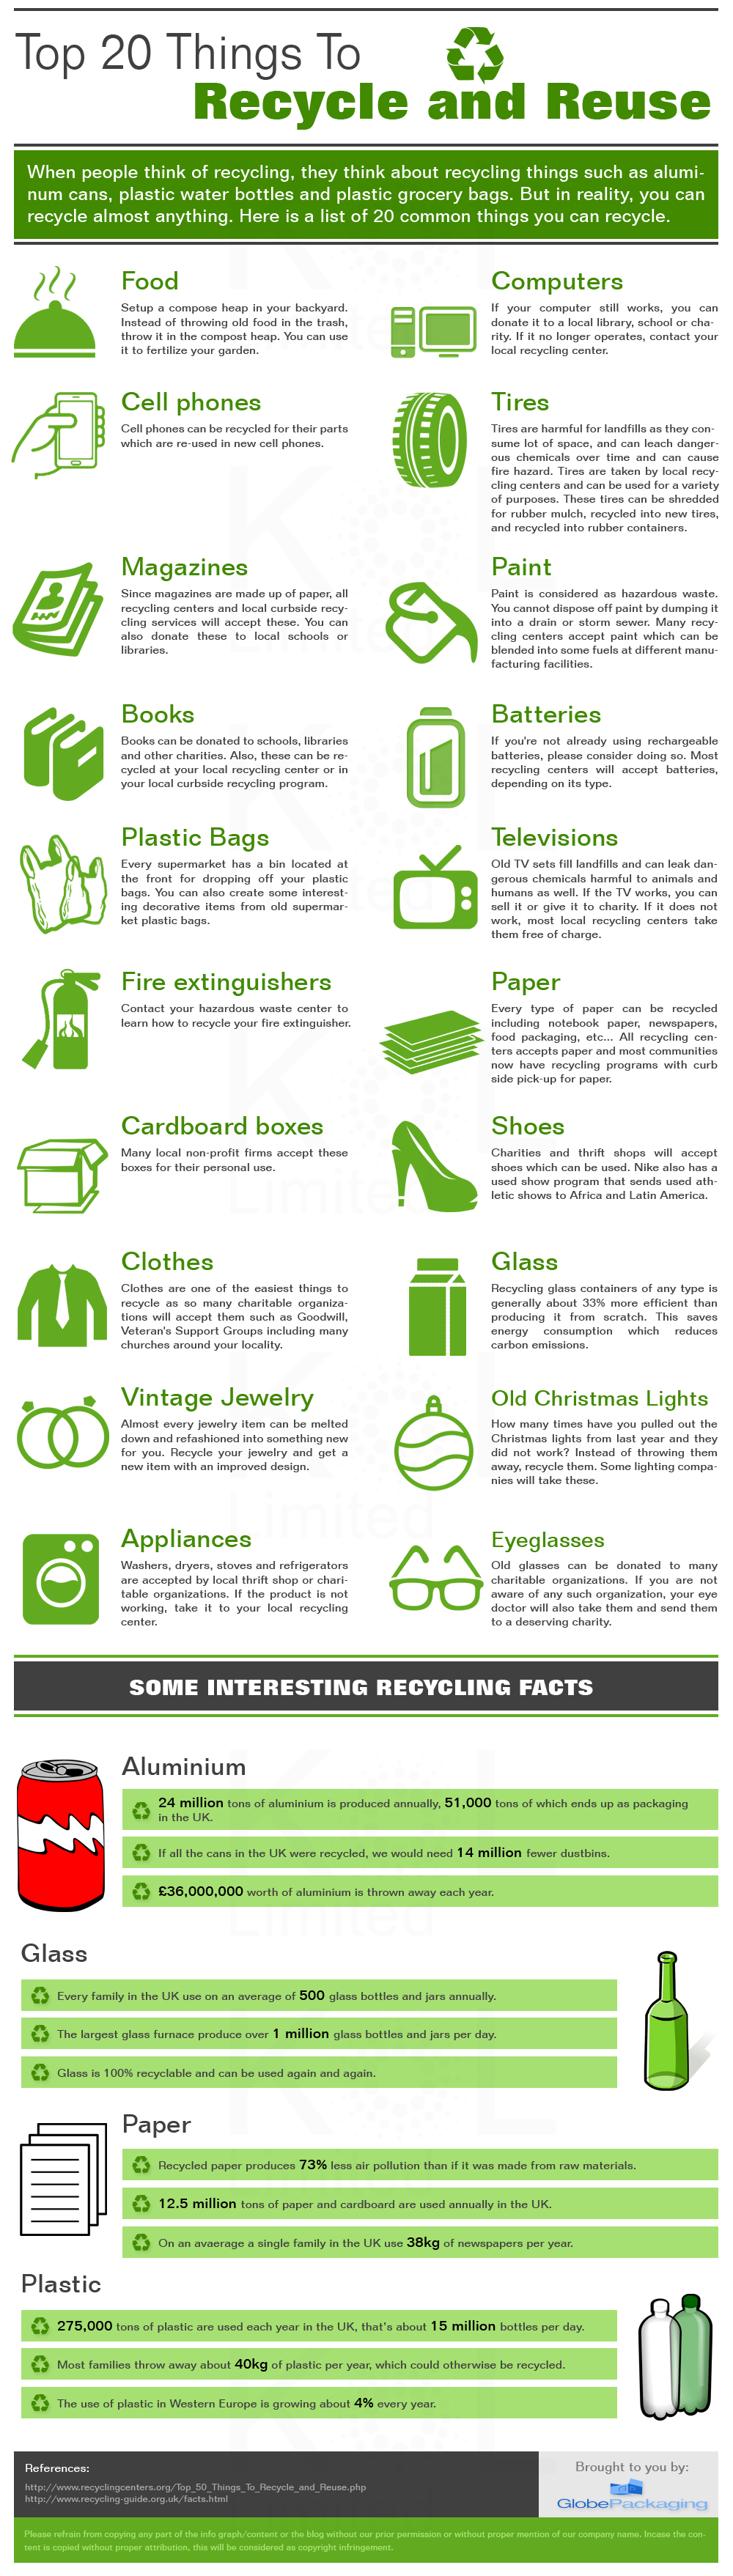 Top 20 things to recycle and reuse